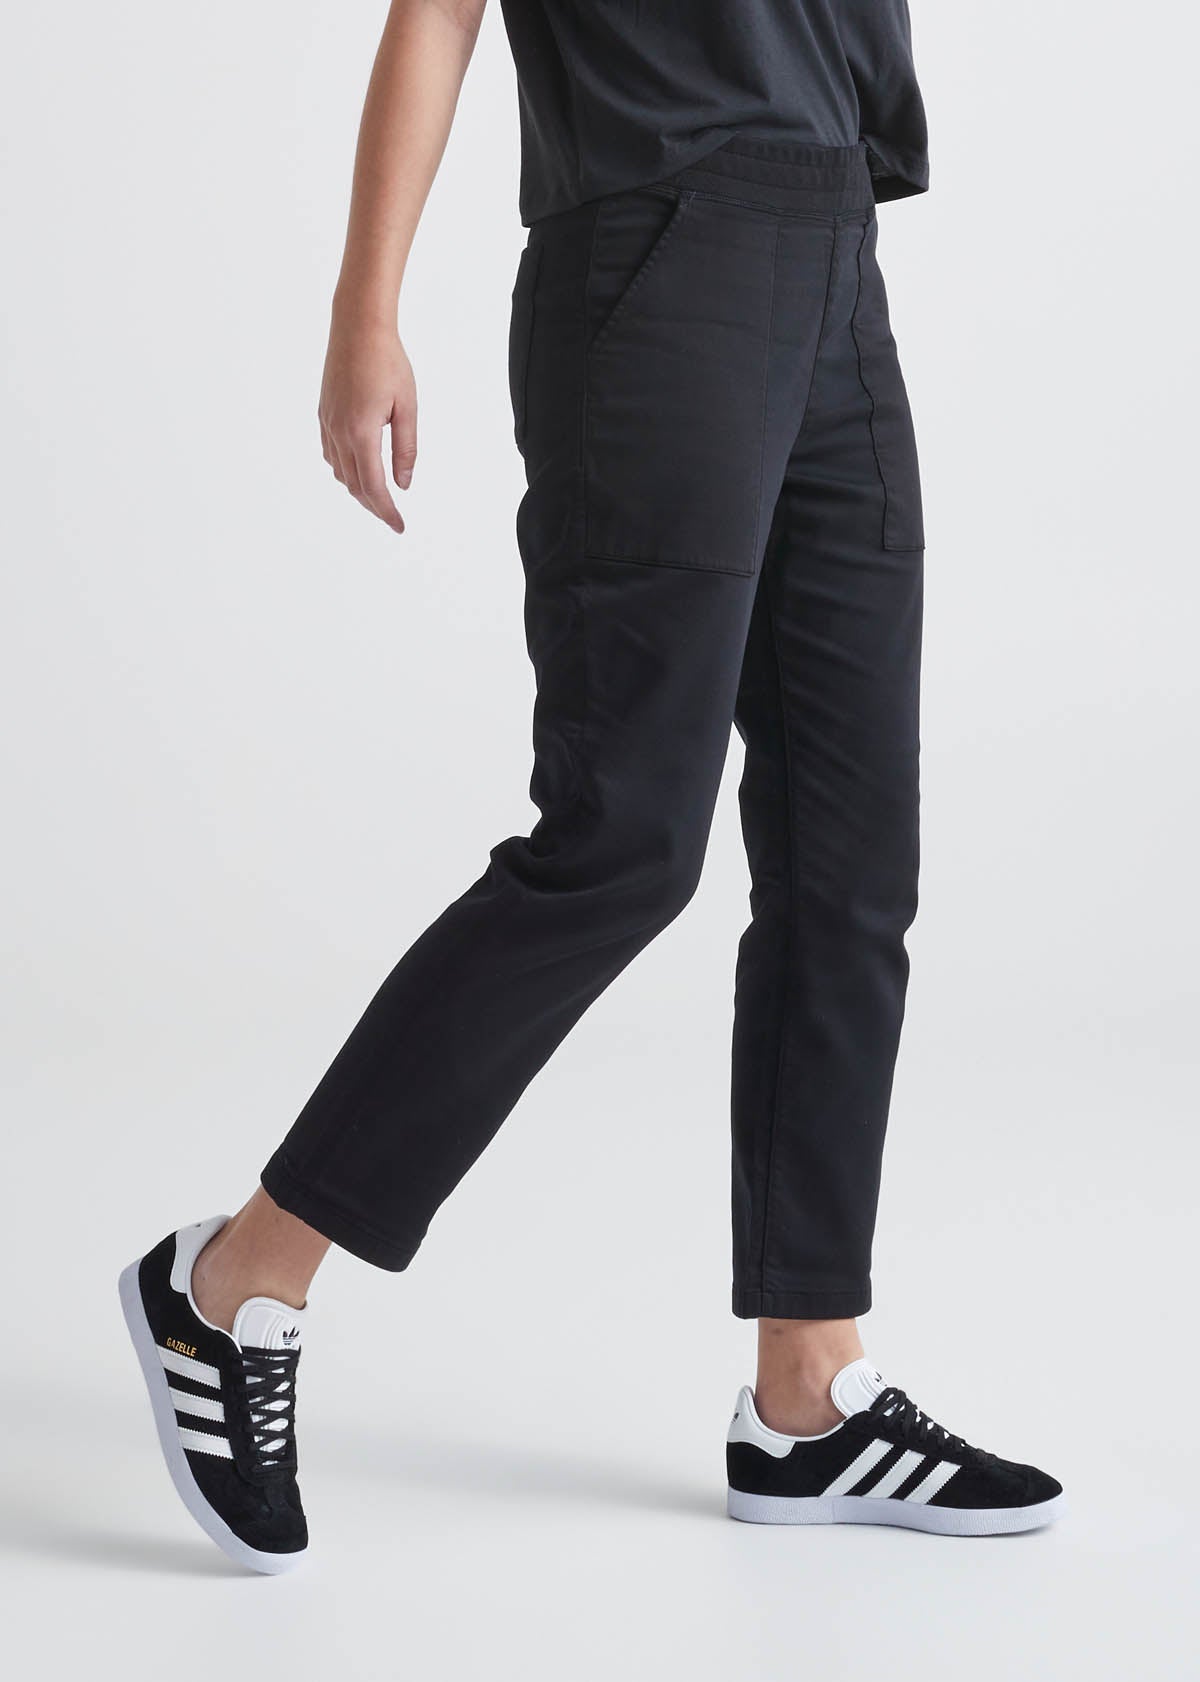 Day-to-day Pants Black